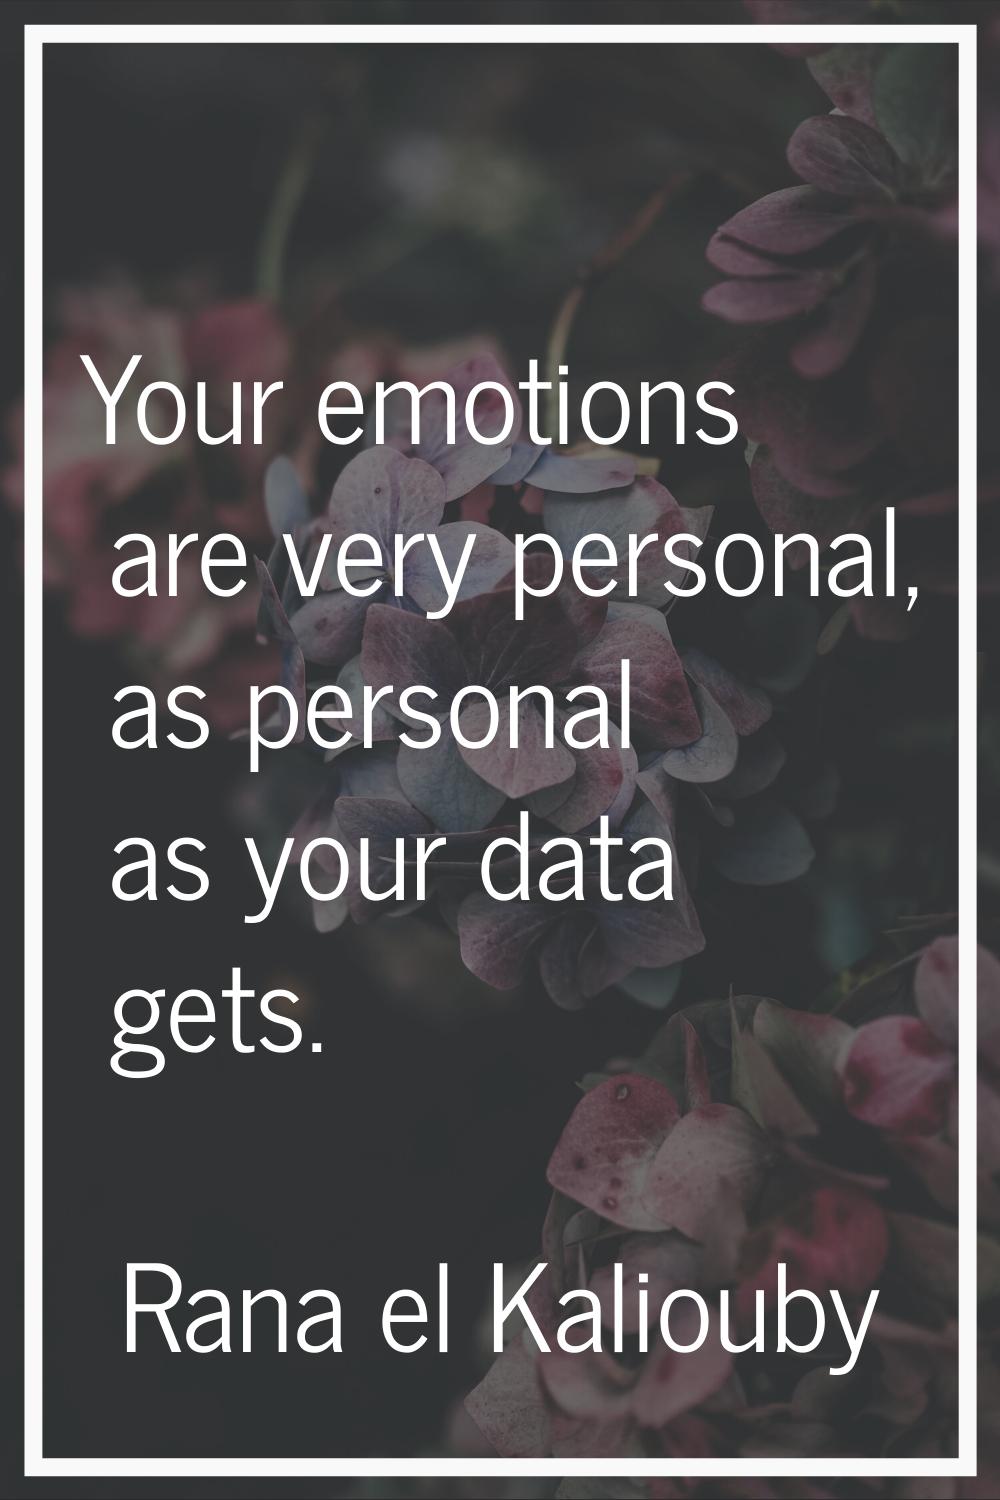 Your emotions are very personal, as personal as your data gets.